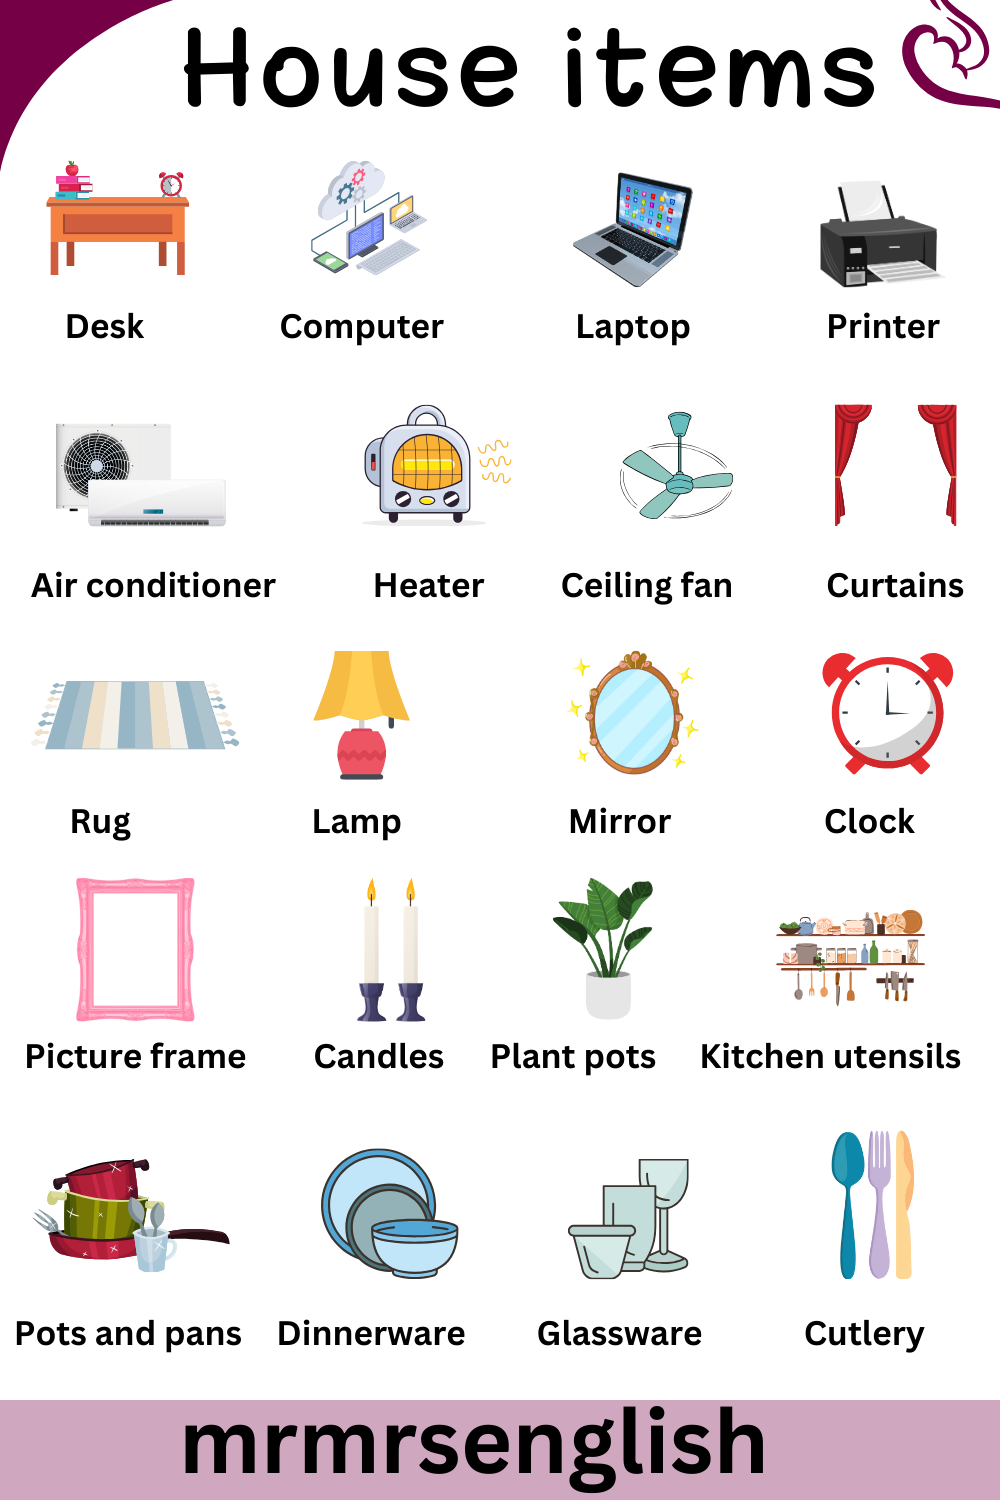 Household Devices and Appliances Names in English